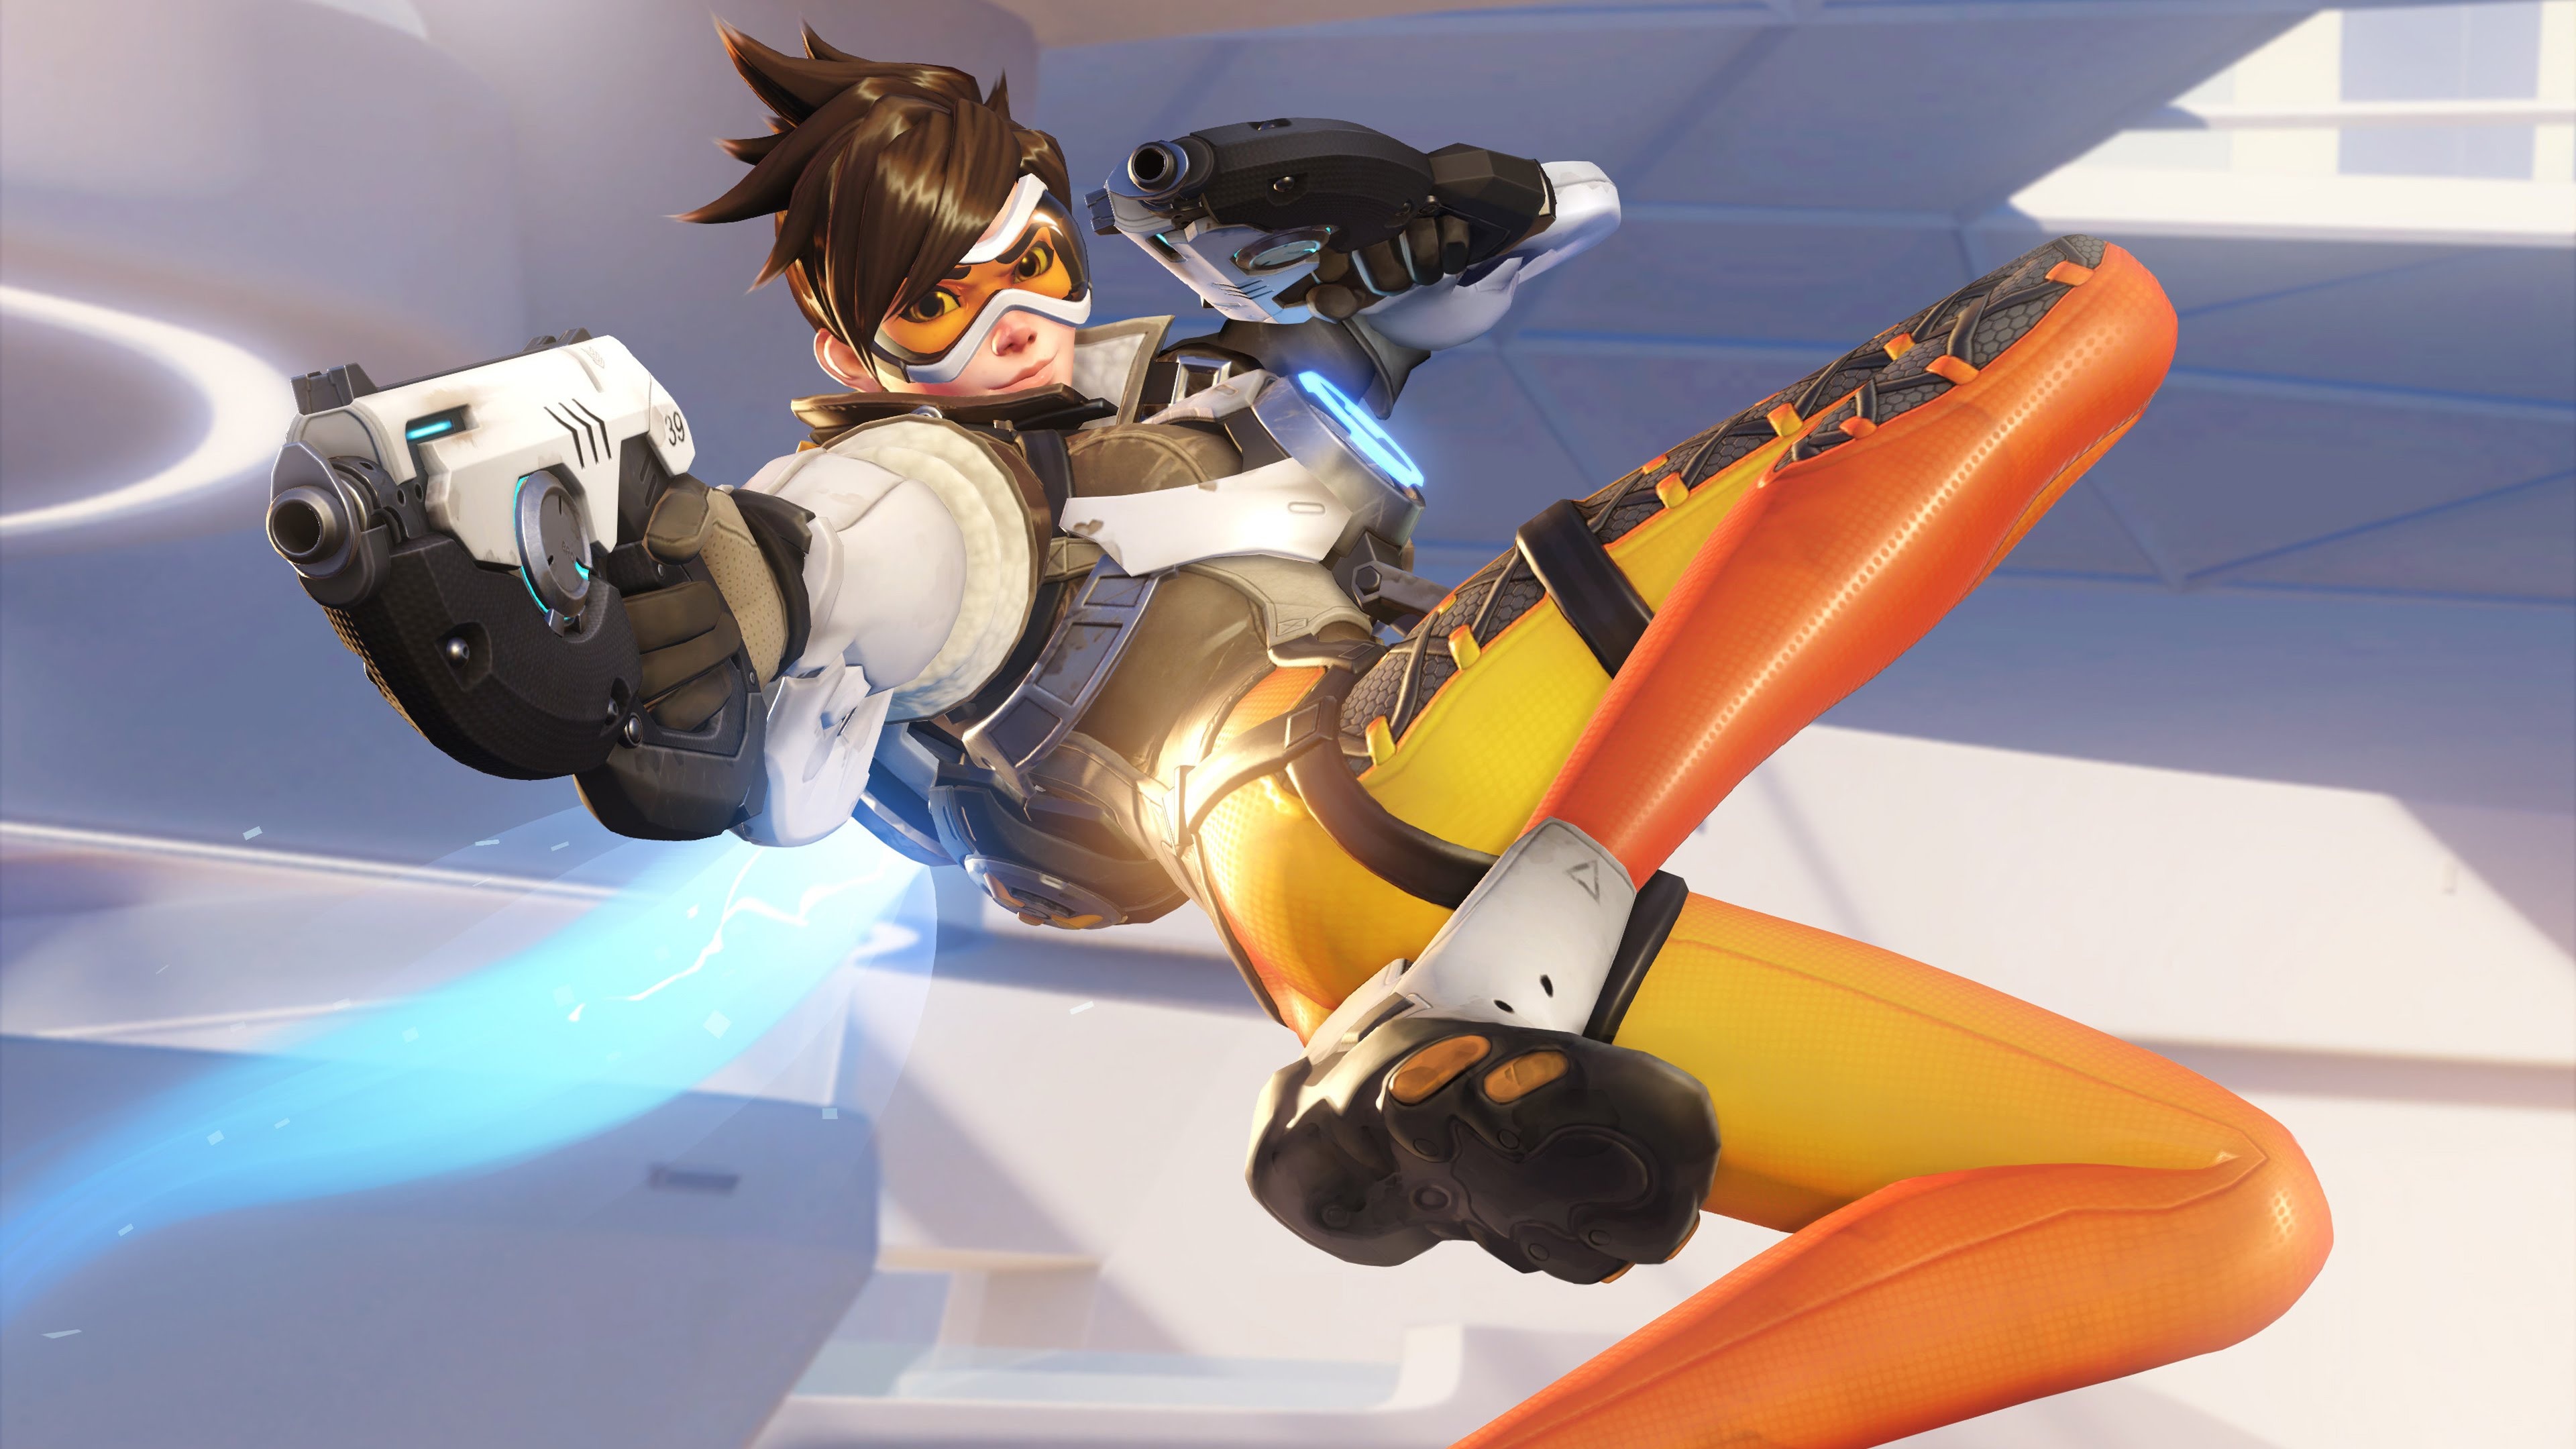 Overwatch 4k 1080p And 720p Ultra HD Wallpaper Gaming So Far